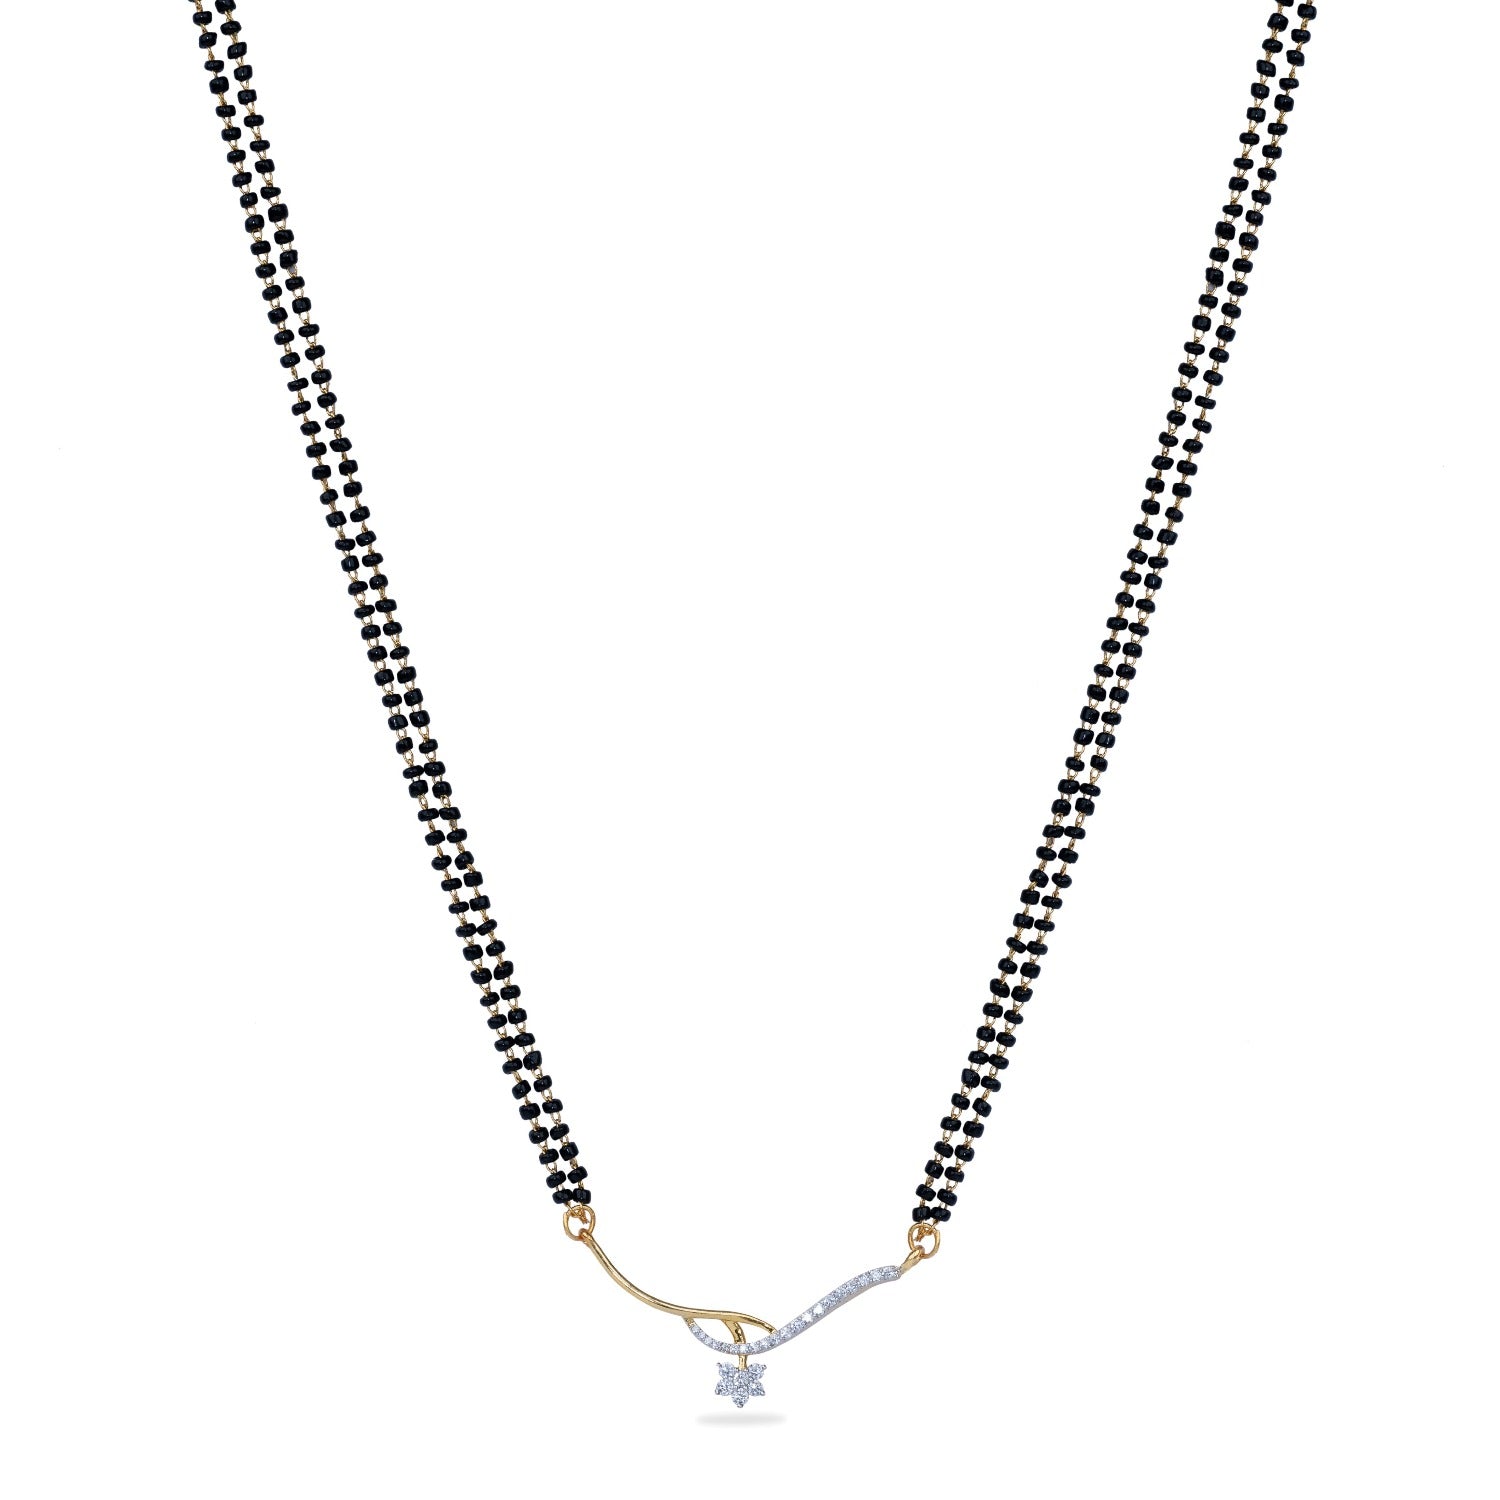 Blooming CZ White Black Beads Necklace